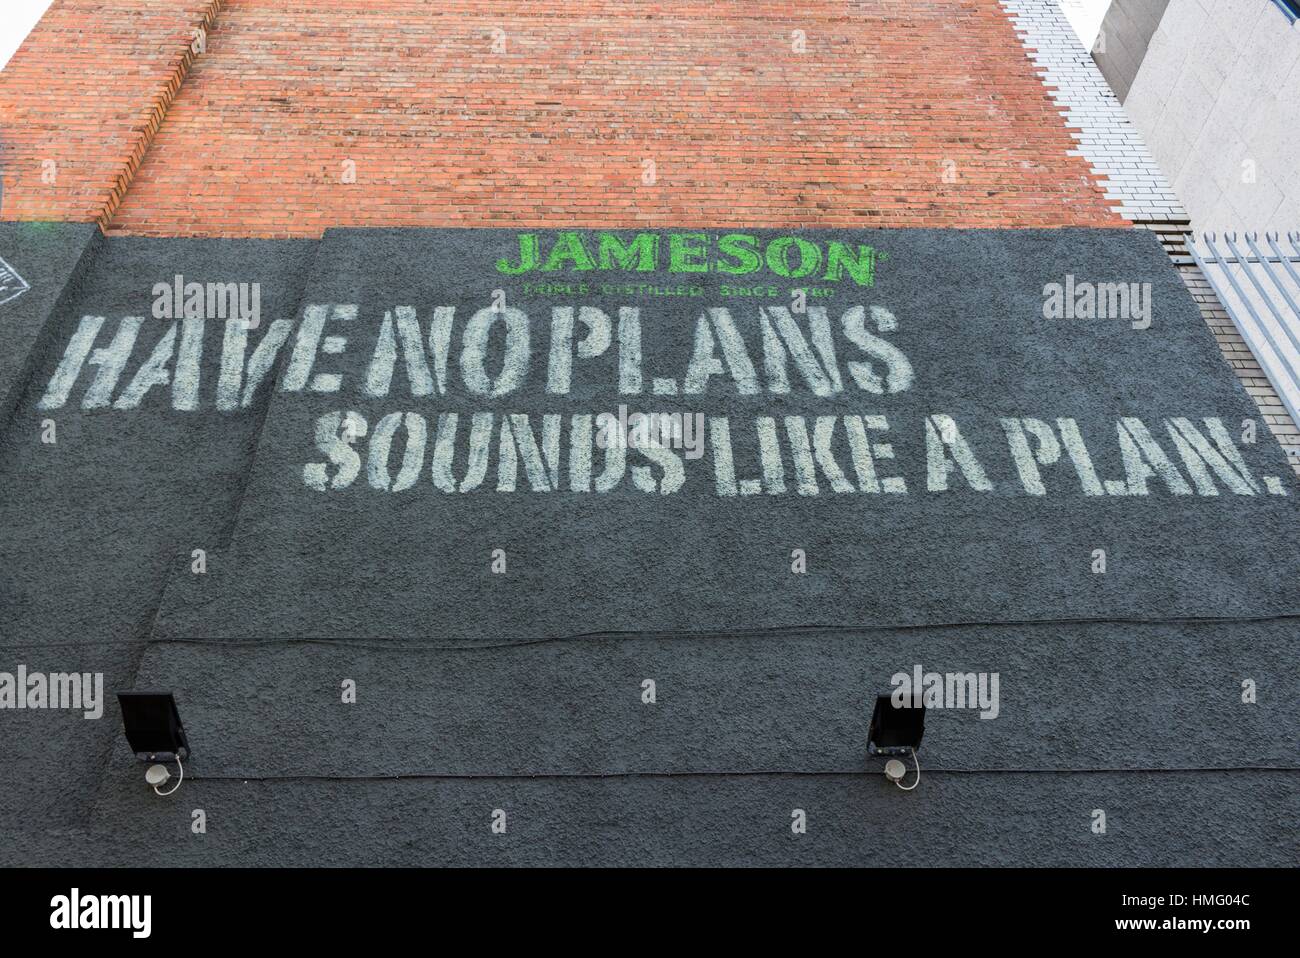 Have No Plans, Sounds Like a Plan with an advertisement for Jameson Whiskey in Skipper Street, Belfast. Stock Photo